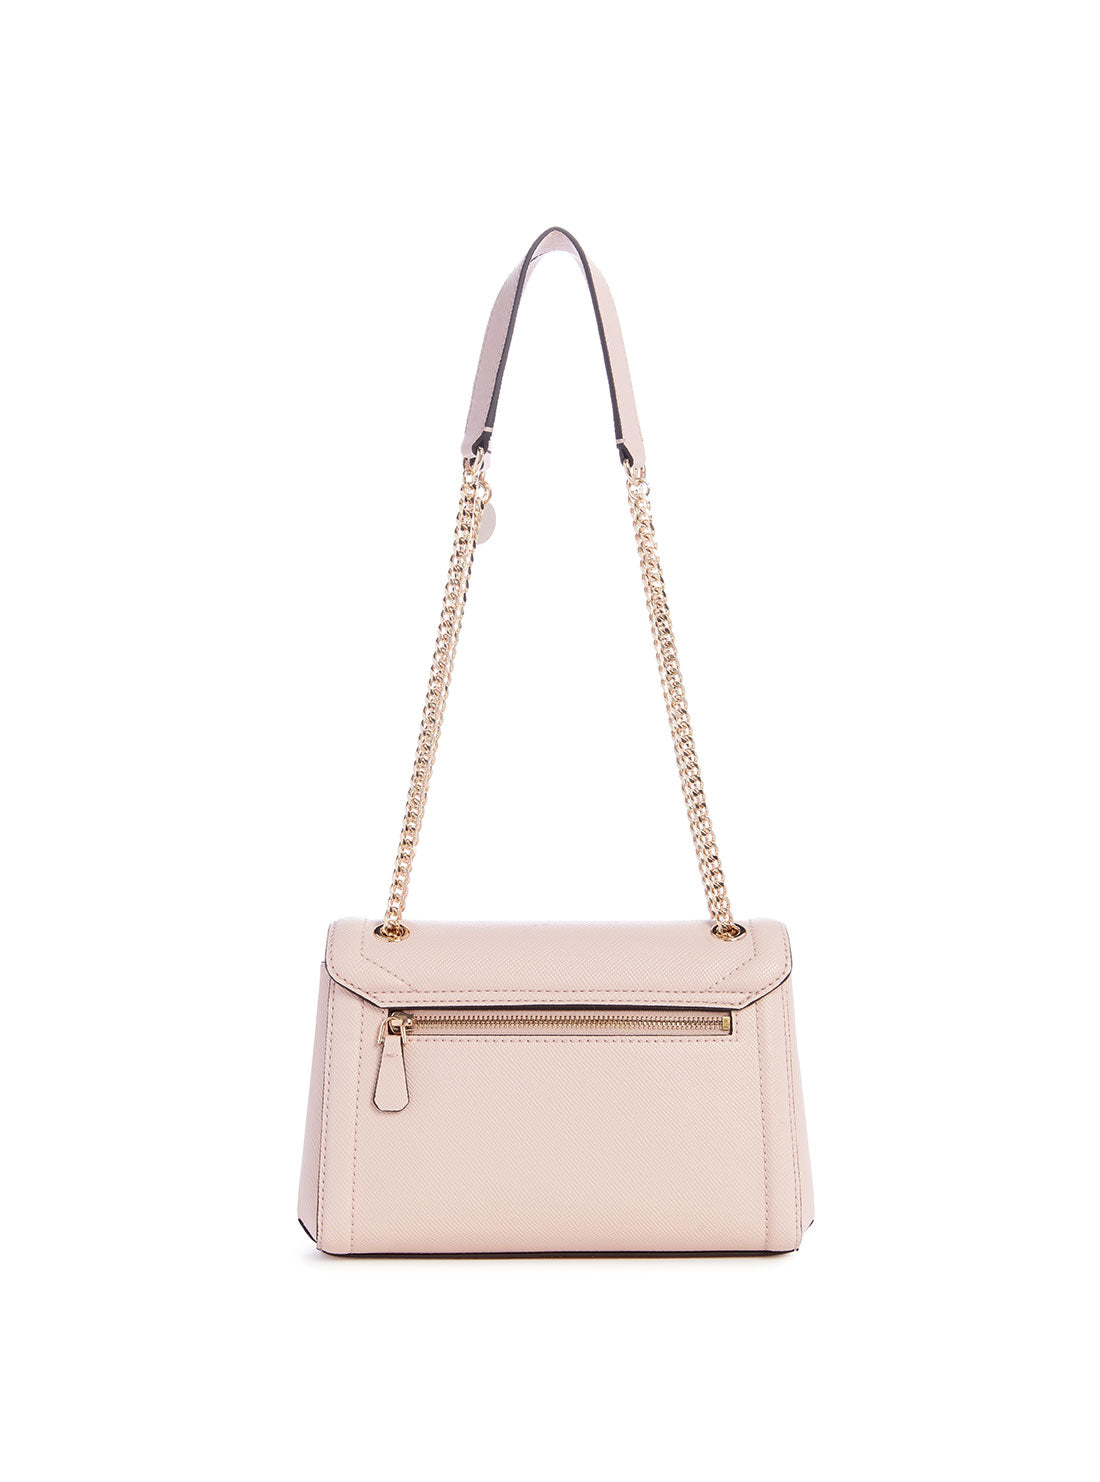 GUESS Pink Noelle Crossbody Flap Bag back view